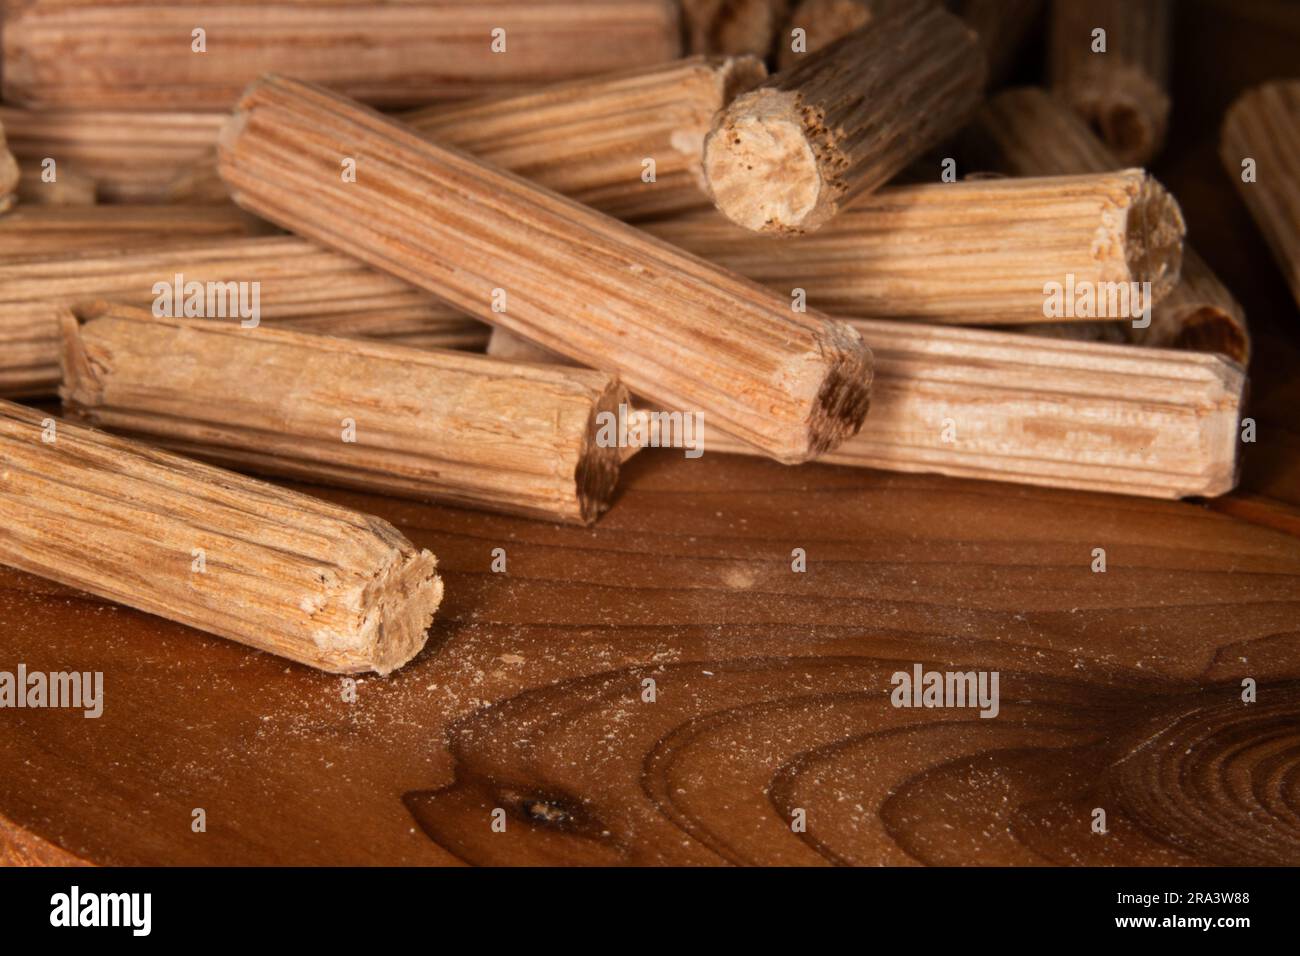 pile of oak dowel pins on cedar background, dowel pins used to join two pieces of wood, joint, joinery Stock Photo